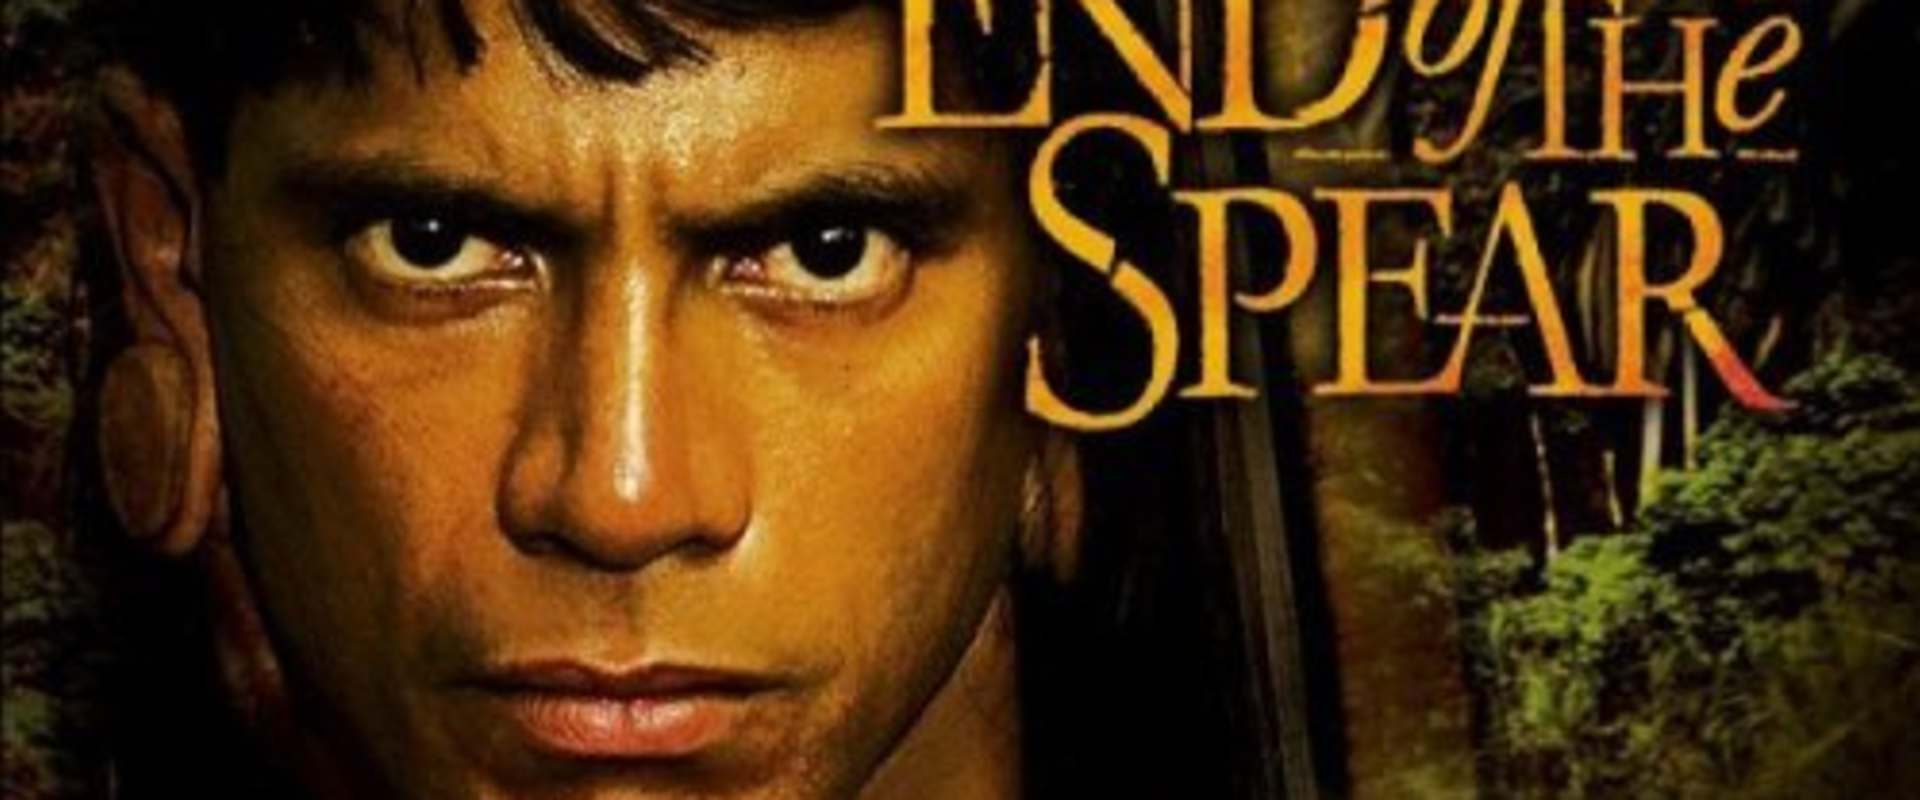 17 Best Photos End Of The Spear Movie / 'It's Only The End Of The World' Poster Released for the ...